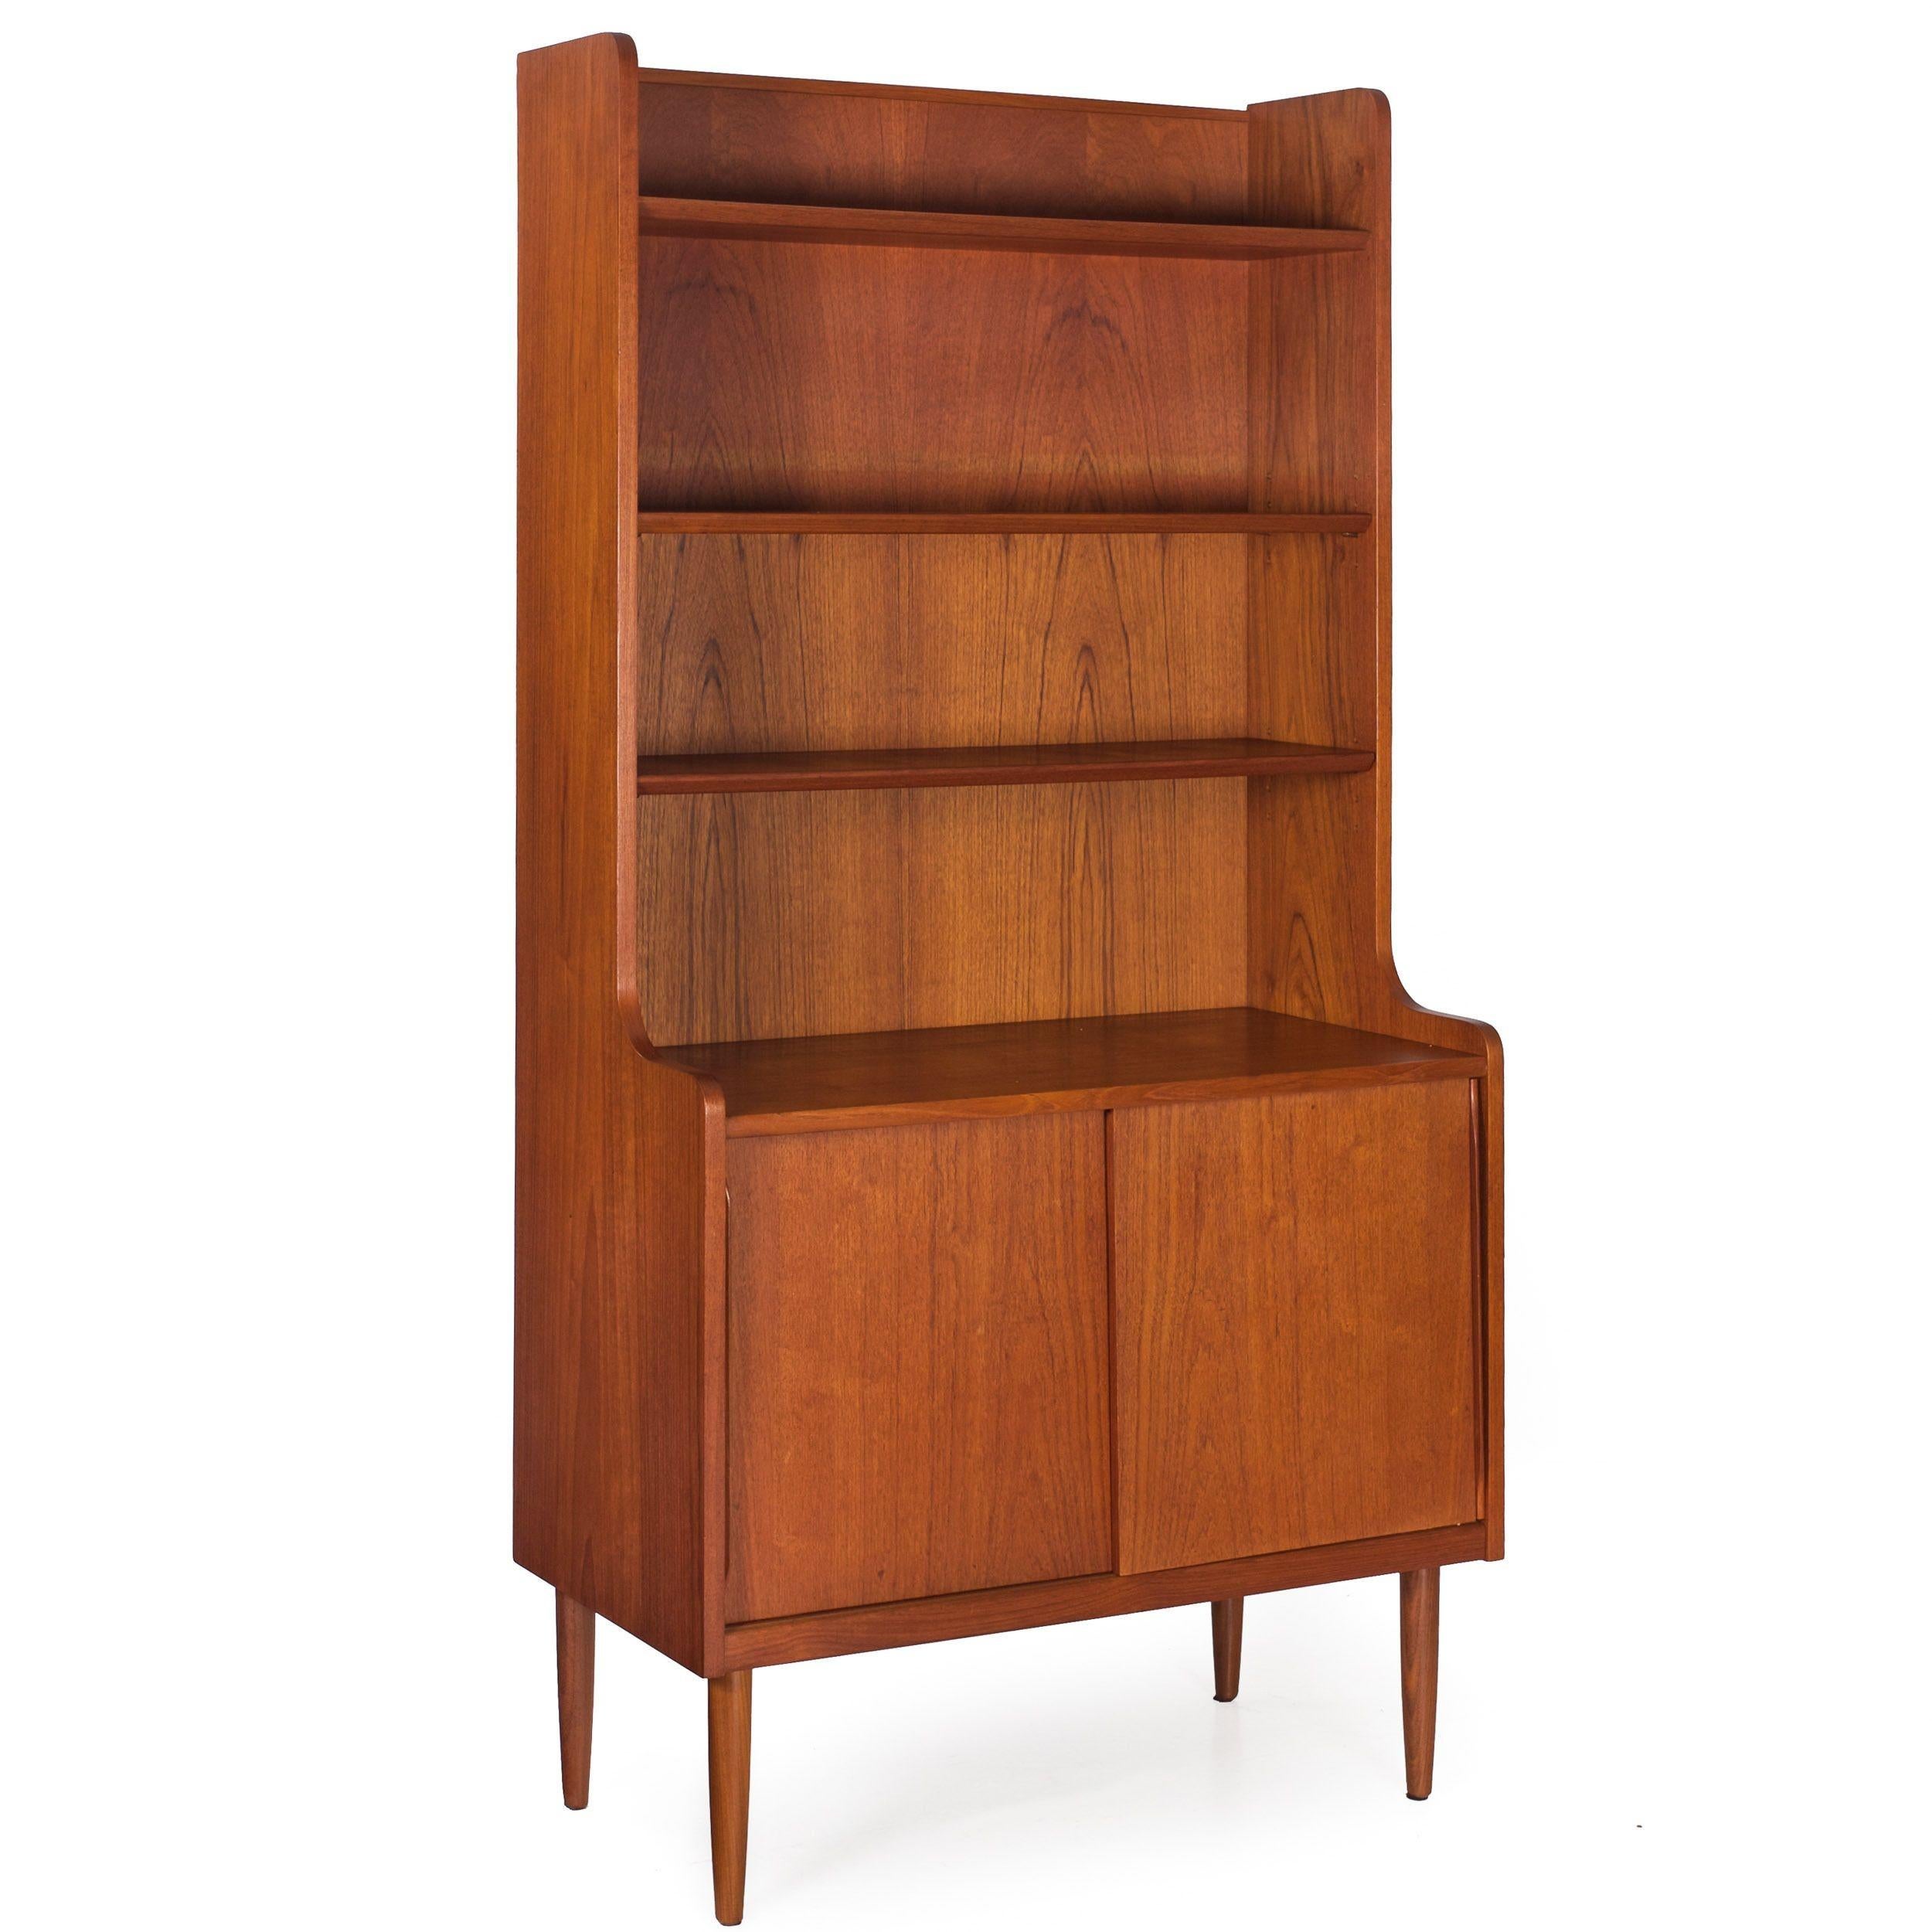 A sleek Danish Modern teak cabinet with three adjustable open shelves over an enclosed cabinet with sliding doors and molded handles. The cabinet is crafted in one integral piece and rests over turned and tapered legs. An old partial label is